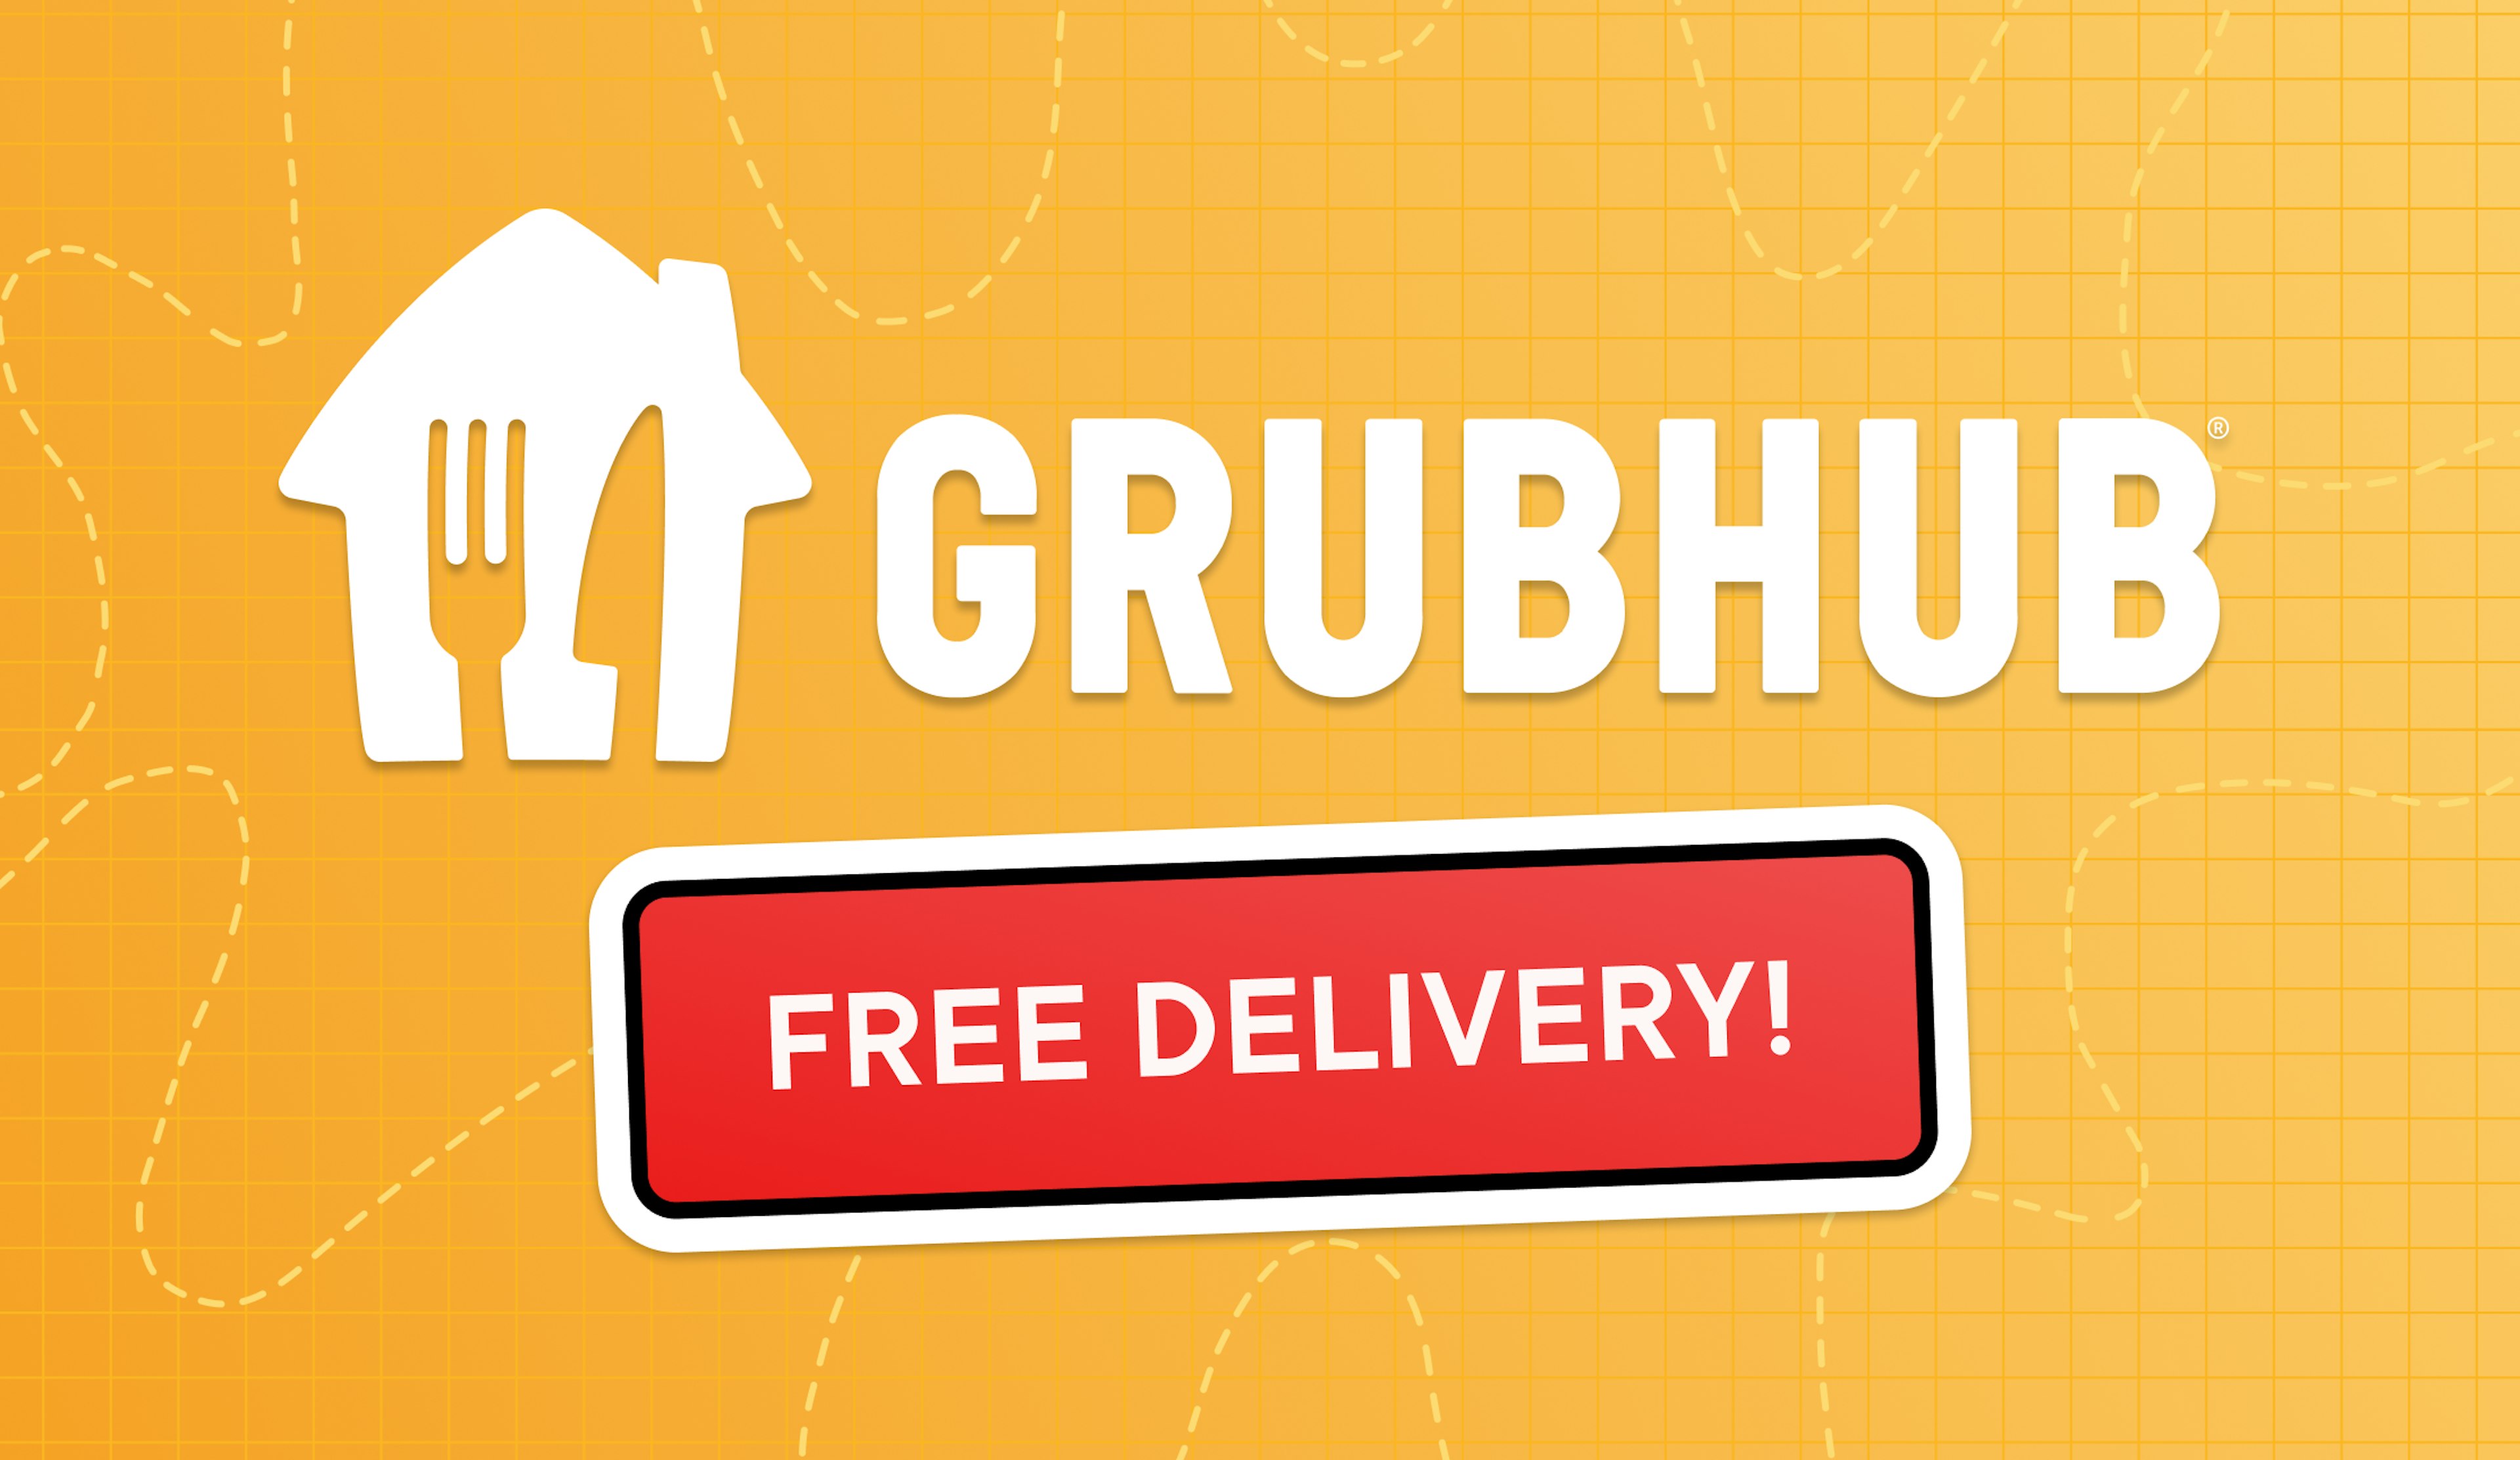 https://images.prismic.io/getcircuit/ebbb01db-1ad9-41b9-95e8-719fc20e17a3_2.+How+to+Get+Free+Delivery+on+Grubhub_+%5Bn%5D+Smart+Ways.png?auto=compress%2Cformat&fit=max&w=3840&q=75